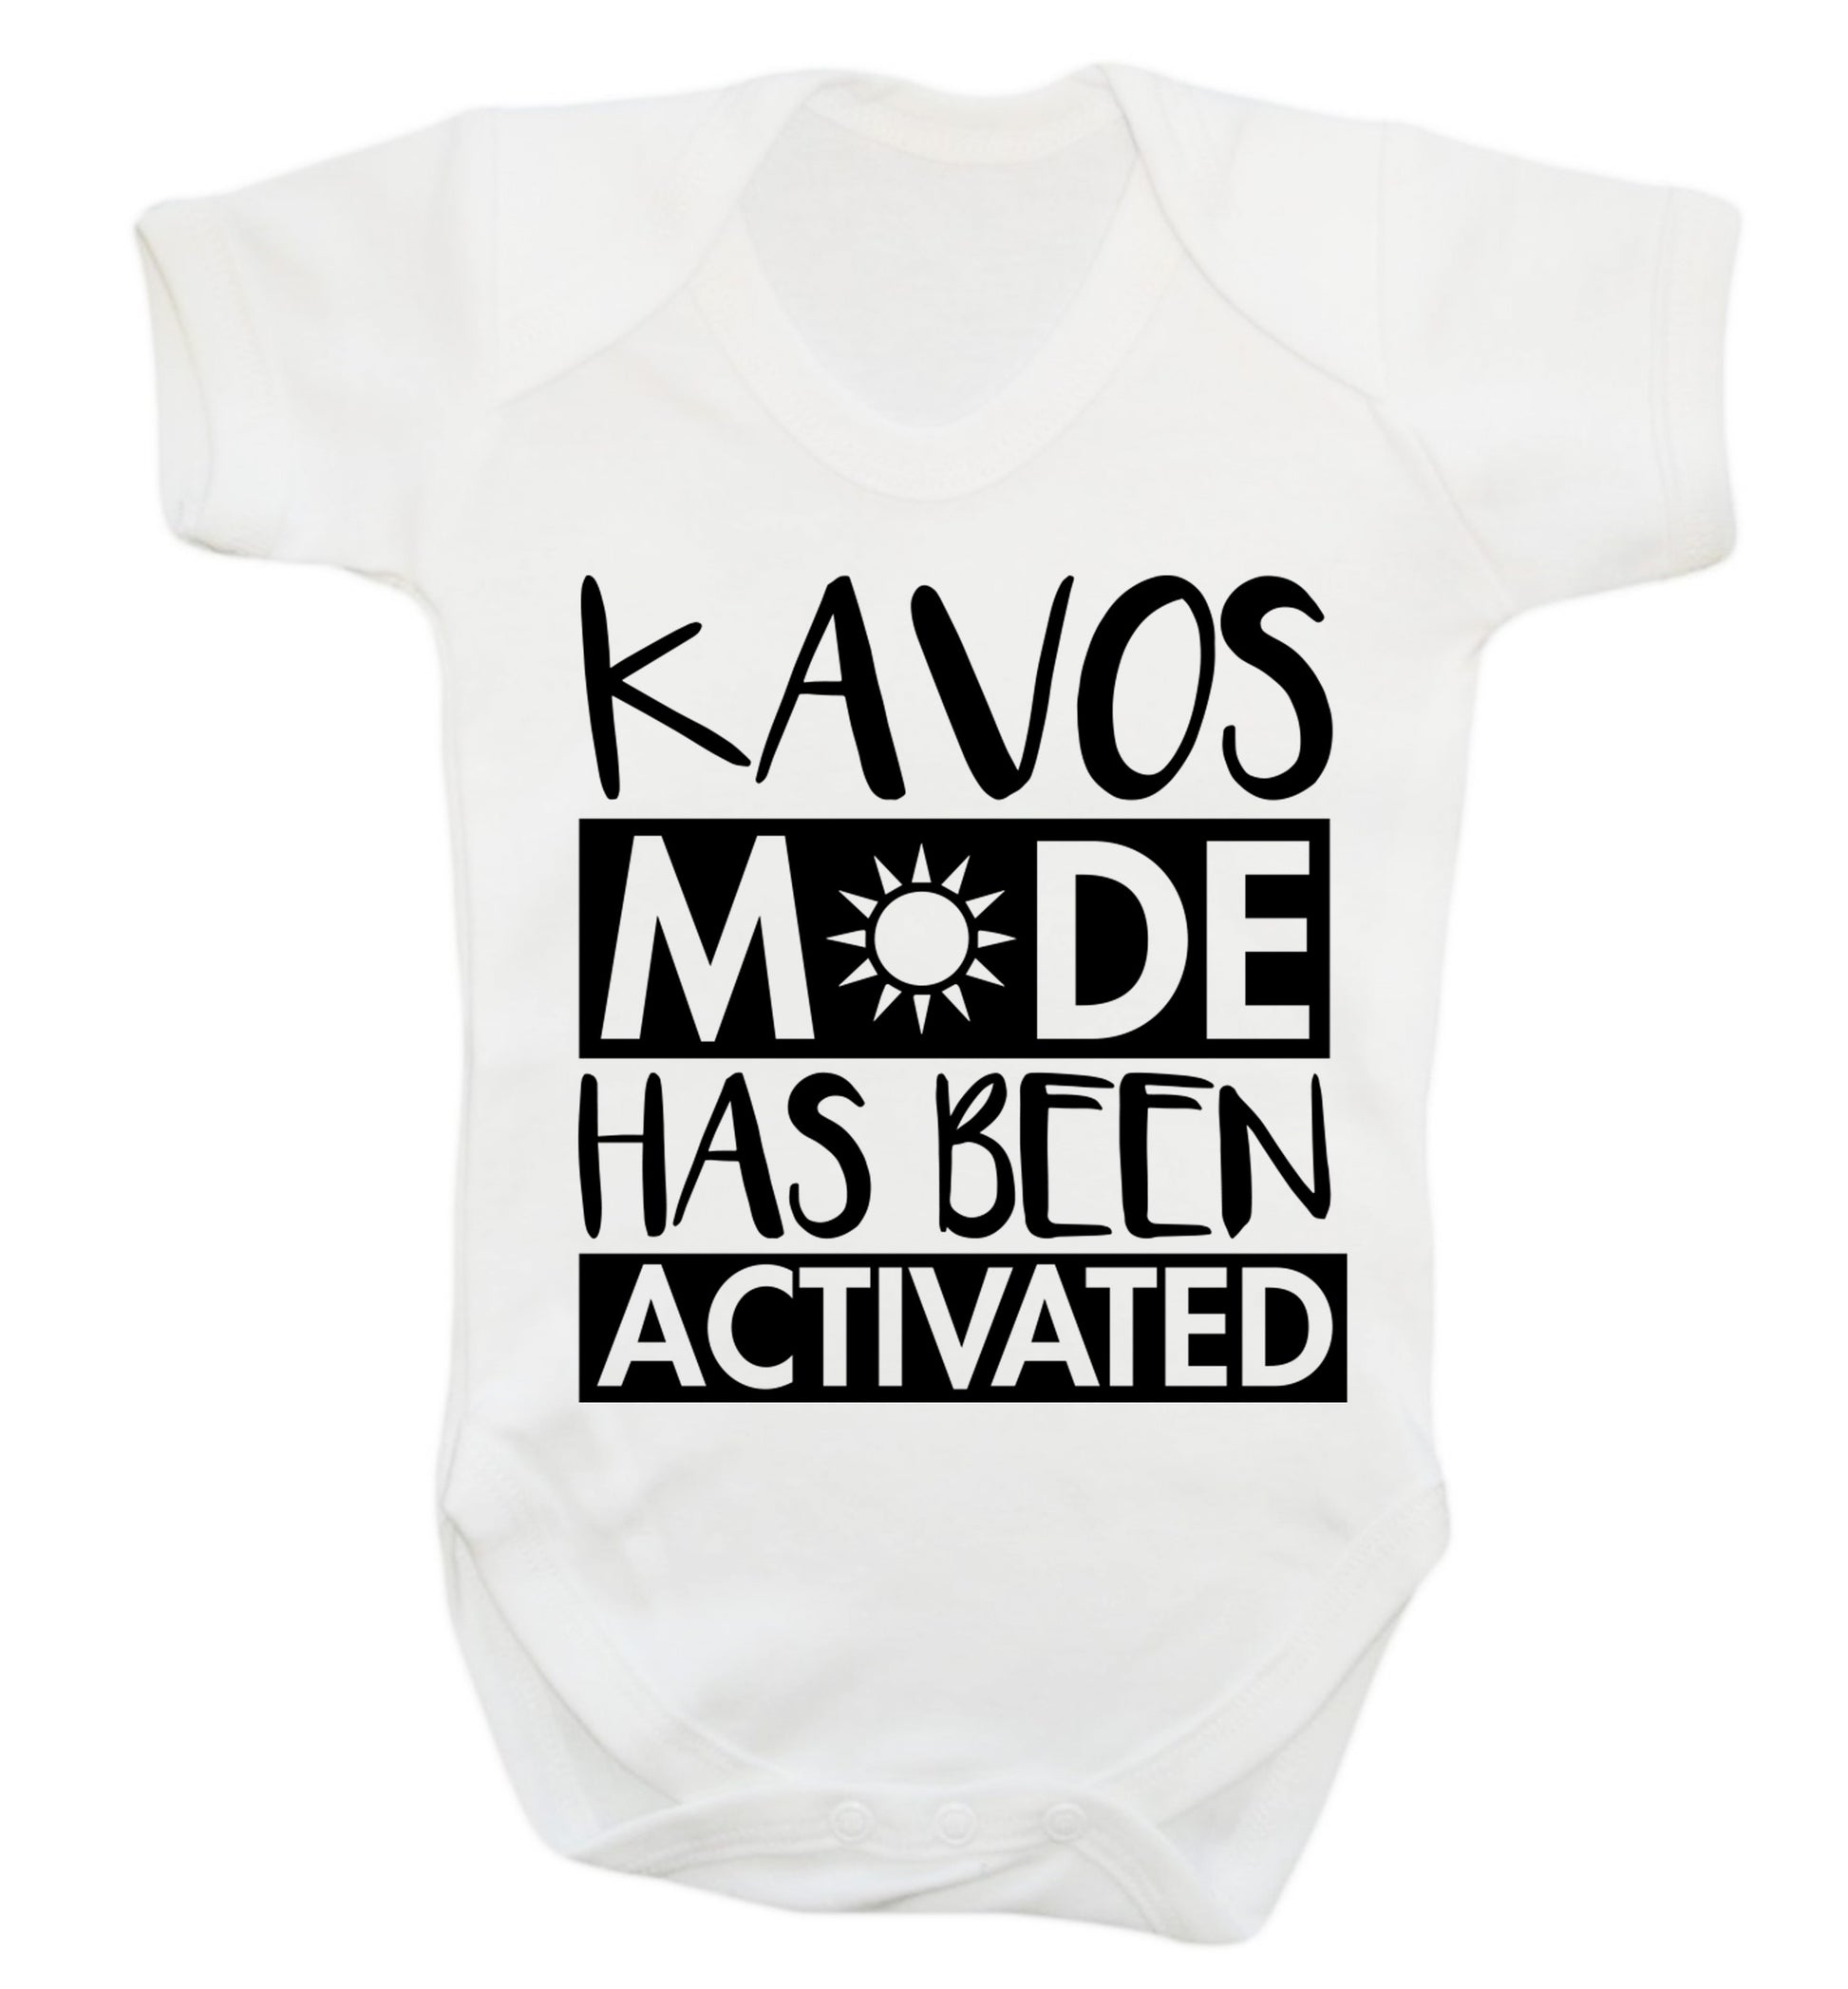 Kavos mode has been activated Baby Vest white 18-24 months